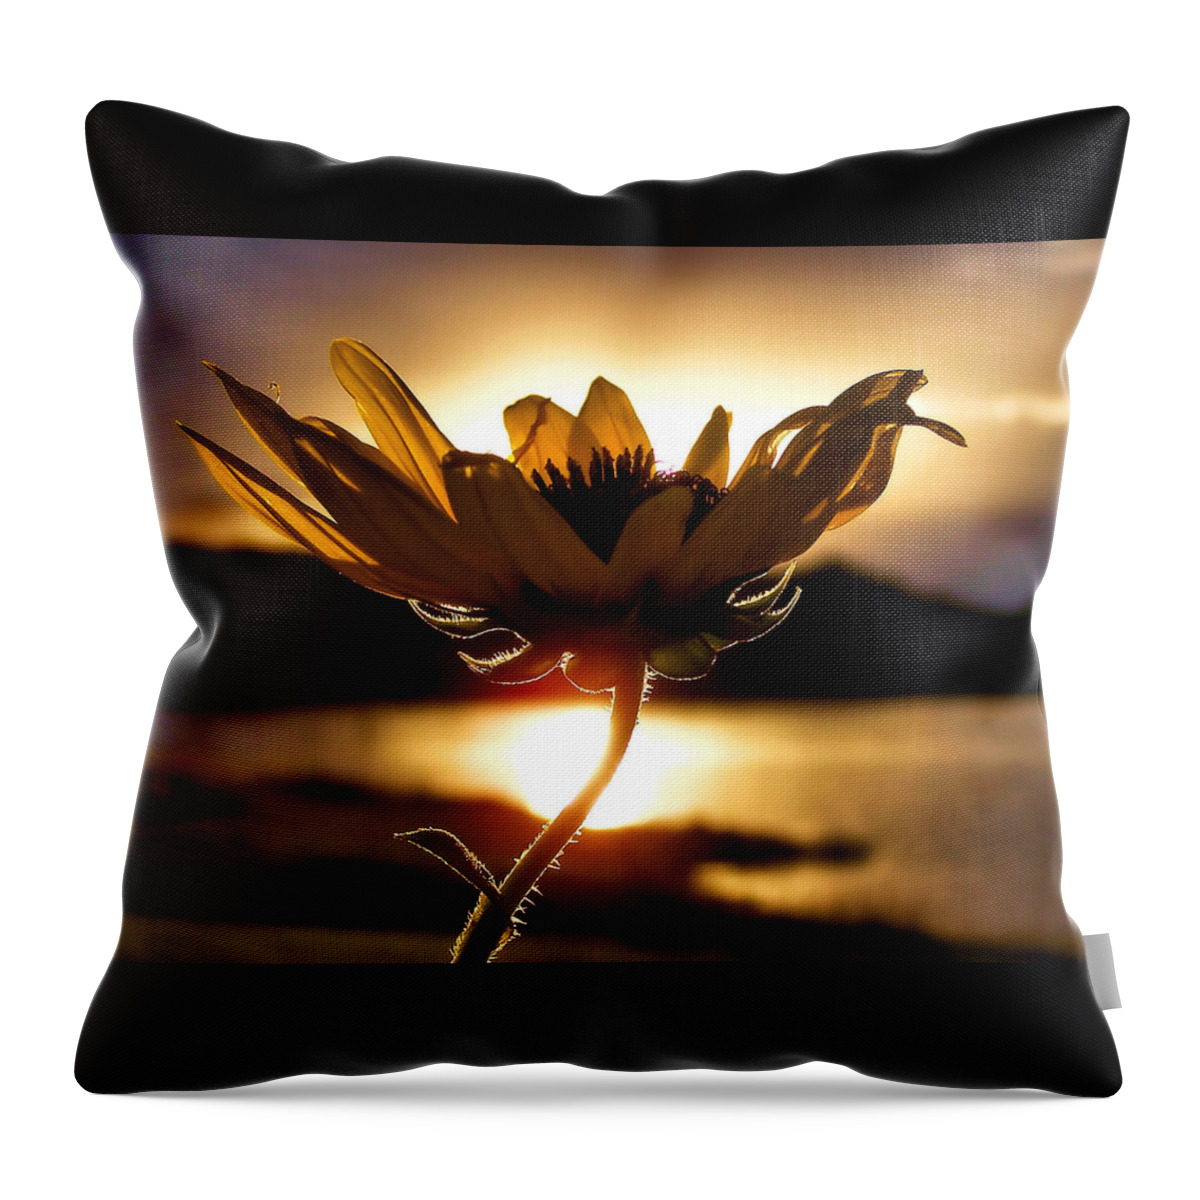 Flower Throw Pillow featuring the photograph Uplifting by Karen Scovill